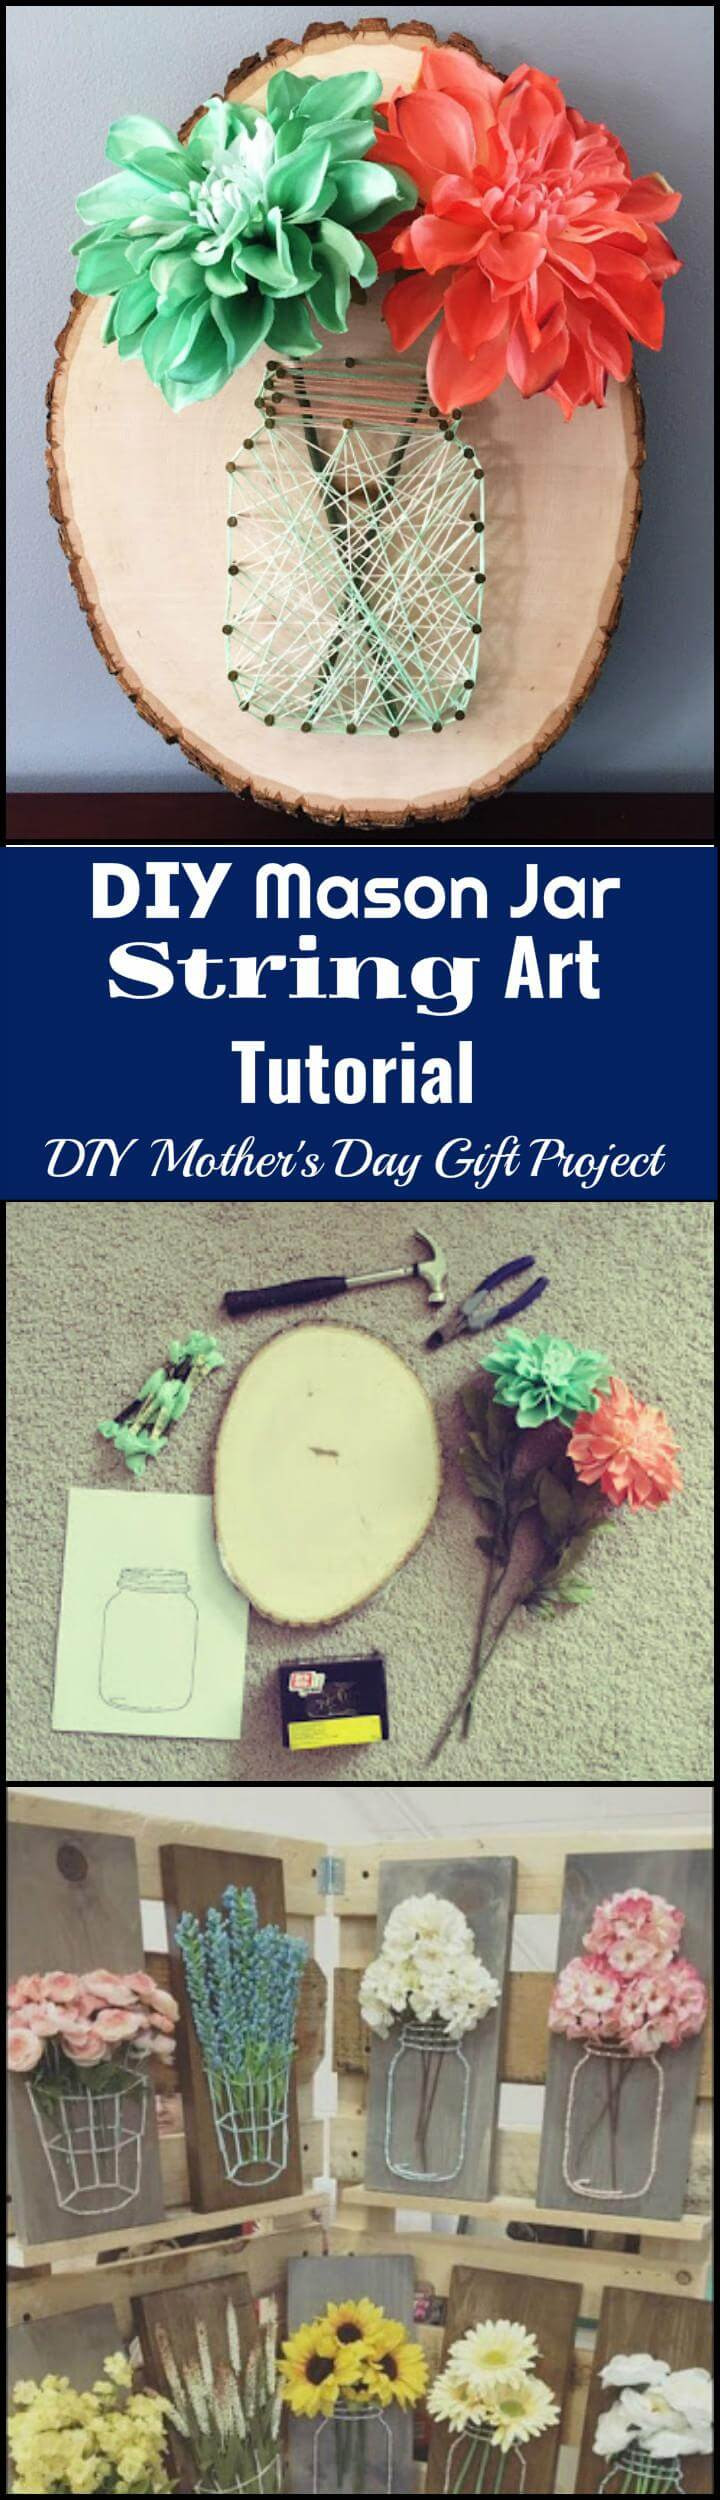 Mother'S Day Gift Ideas Homemade Crafts
 300 DIY Mothers Day Gifts You Can Make For Your Mom